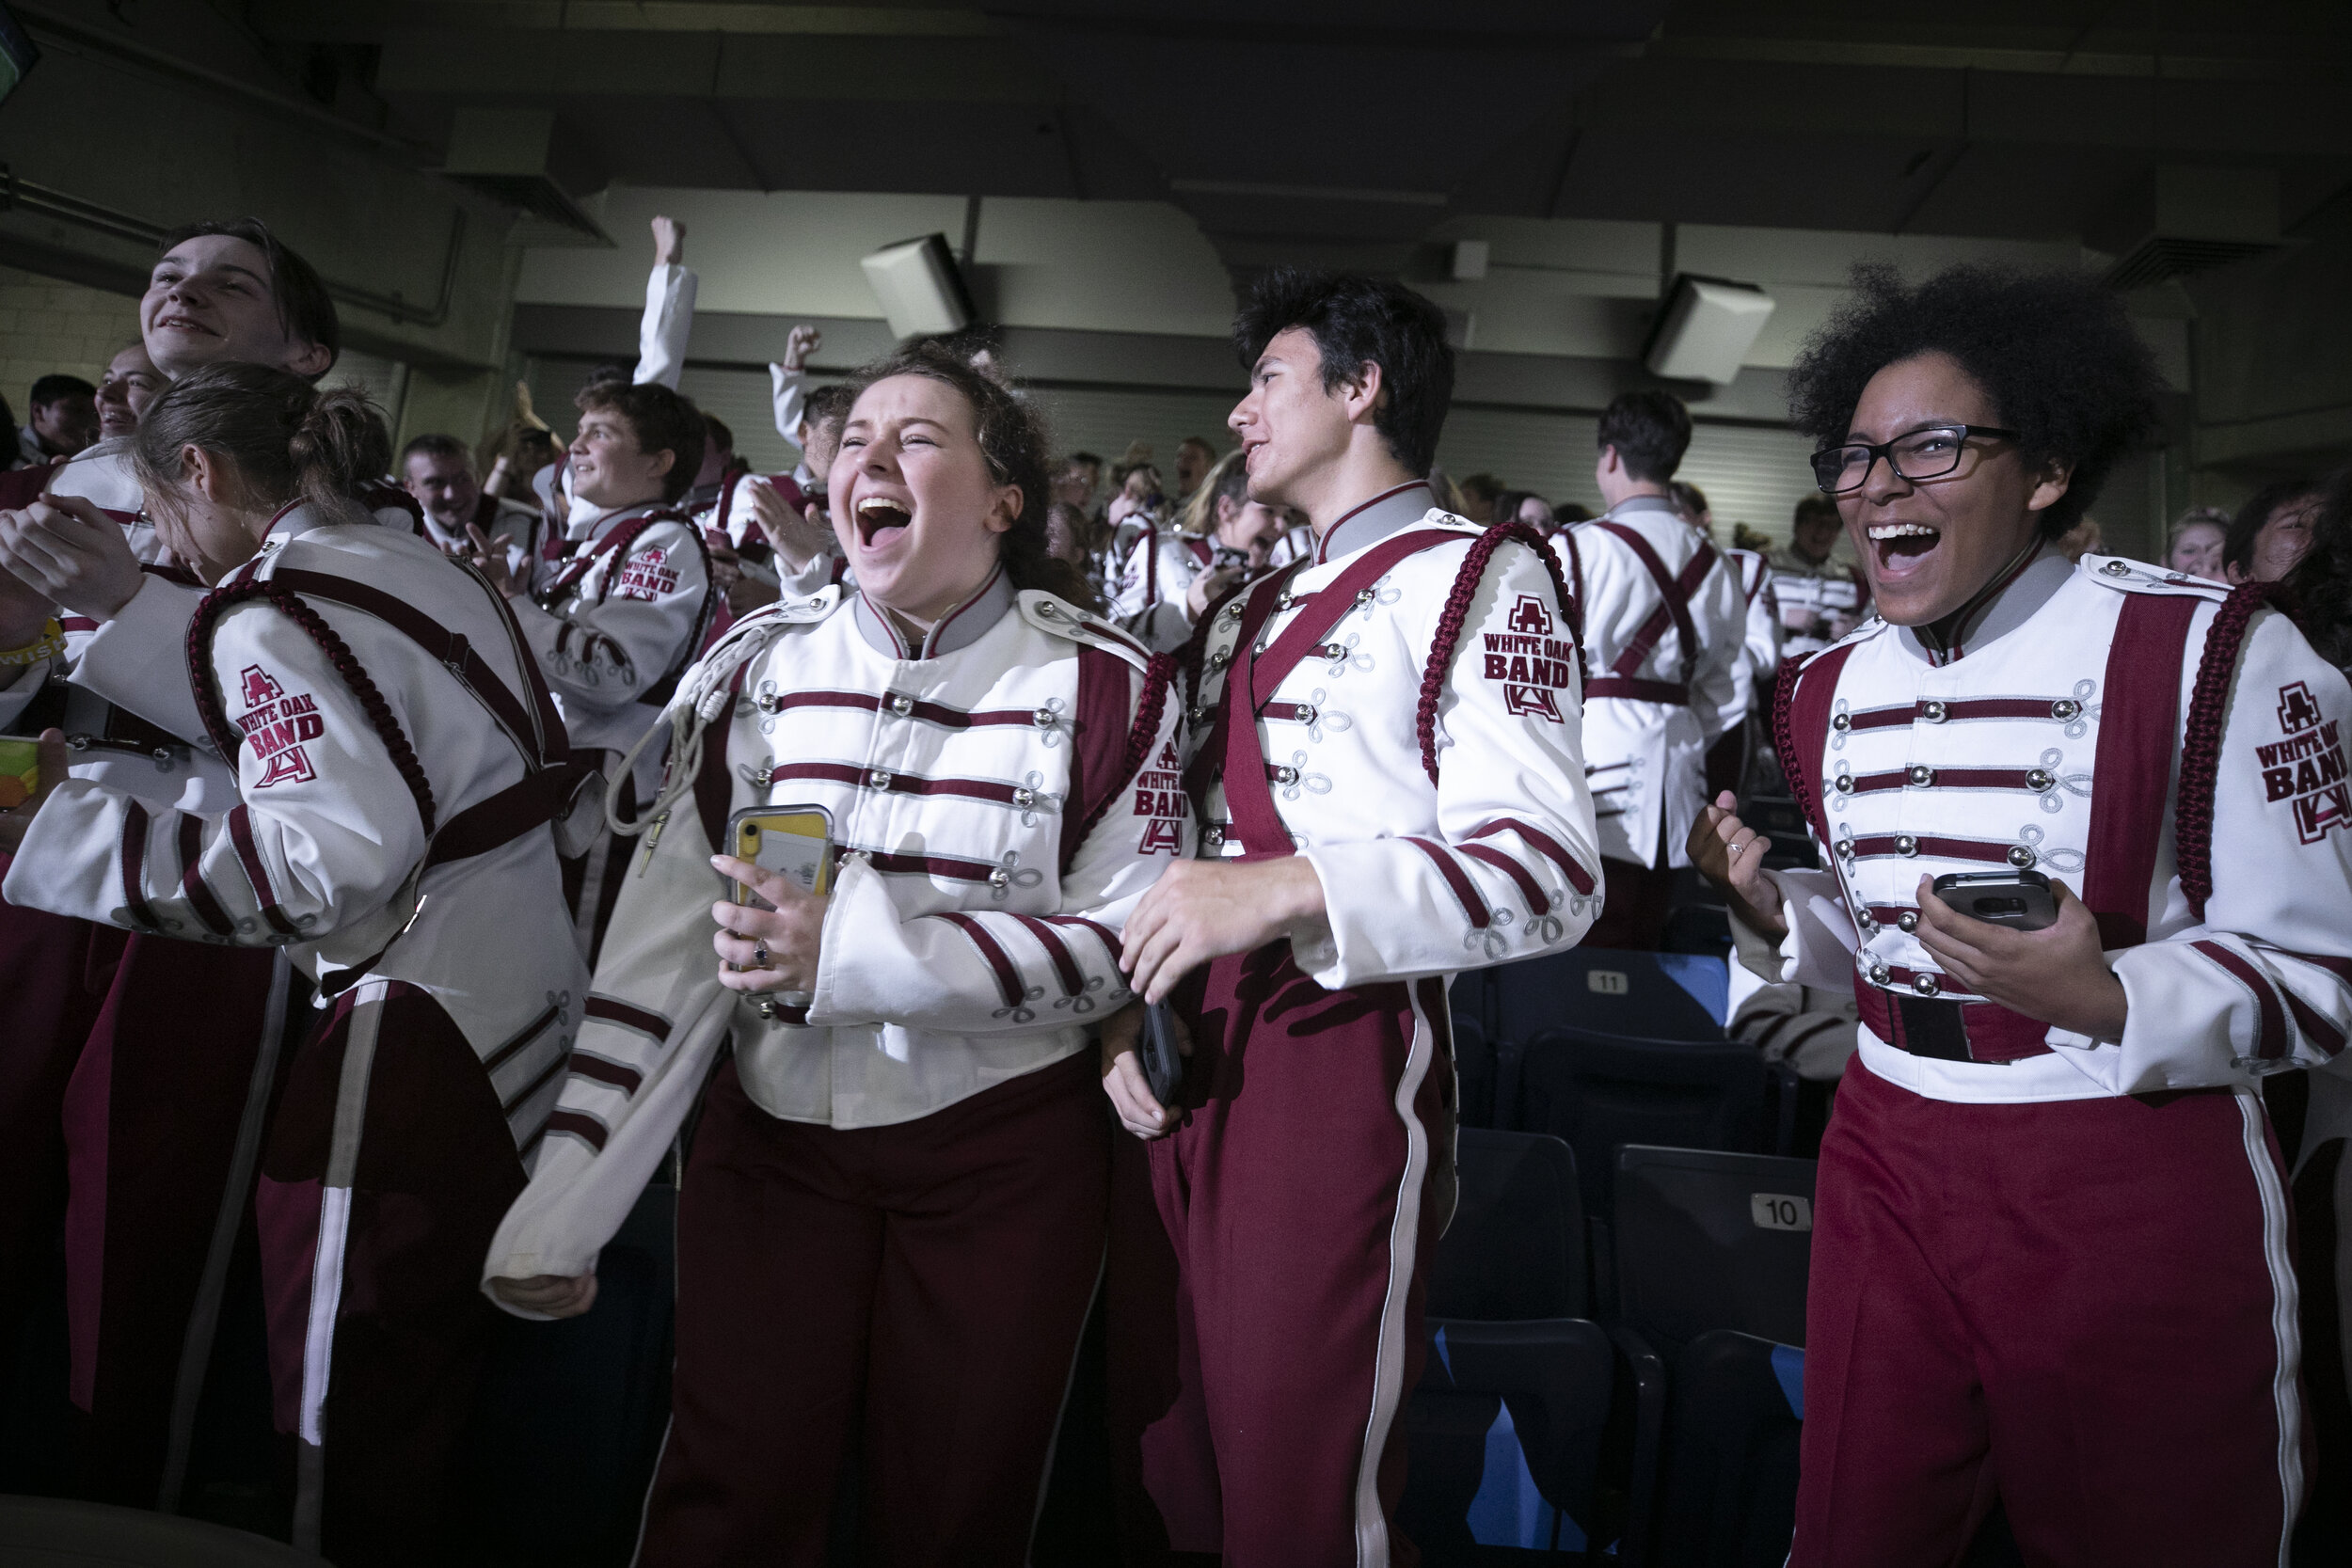  SAN ANTONIO, TX. Students from White Oak HS cheer when their marching band makes finals at the UIL State Marching Band competition. The 3A East Texas high school performed as the only military marching band at the competition. Military marching band